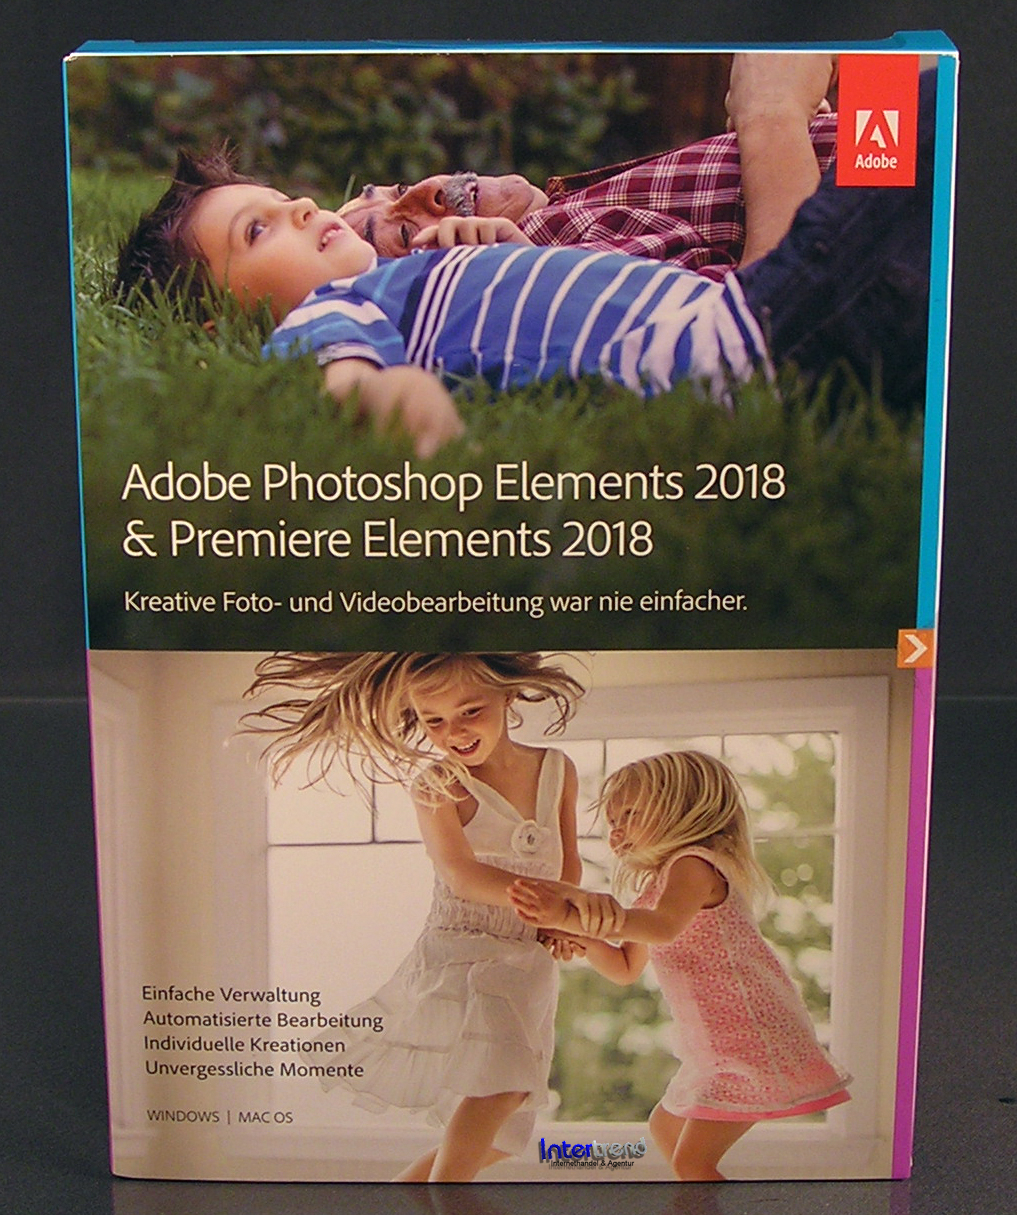 How to install photoshop elements on mac